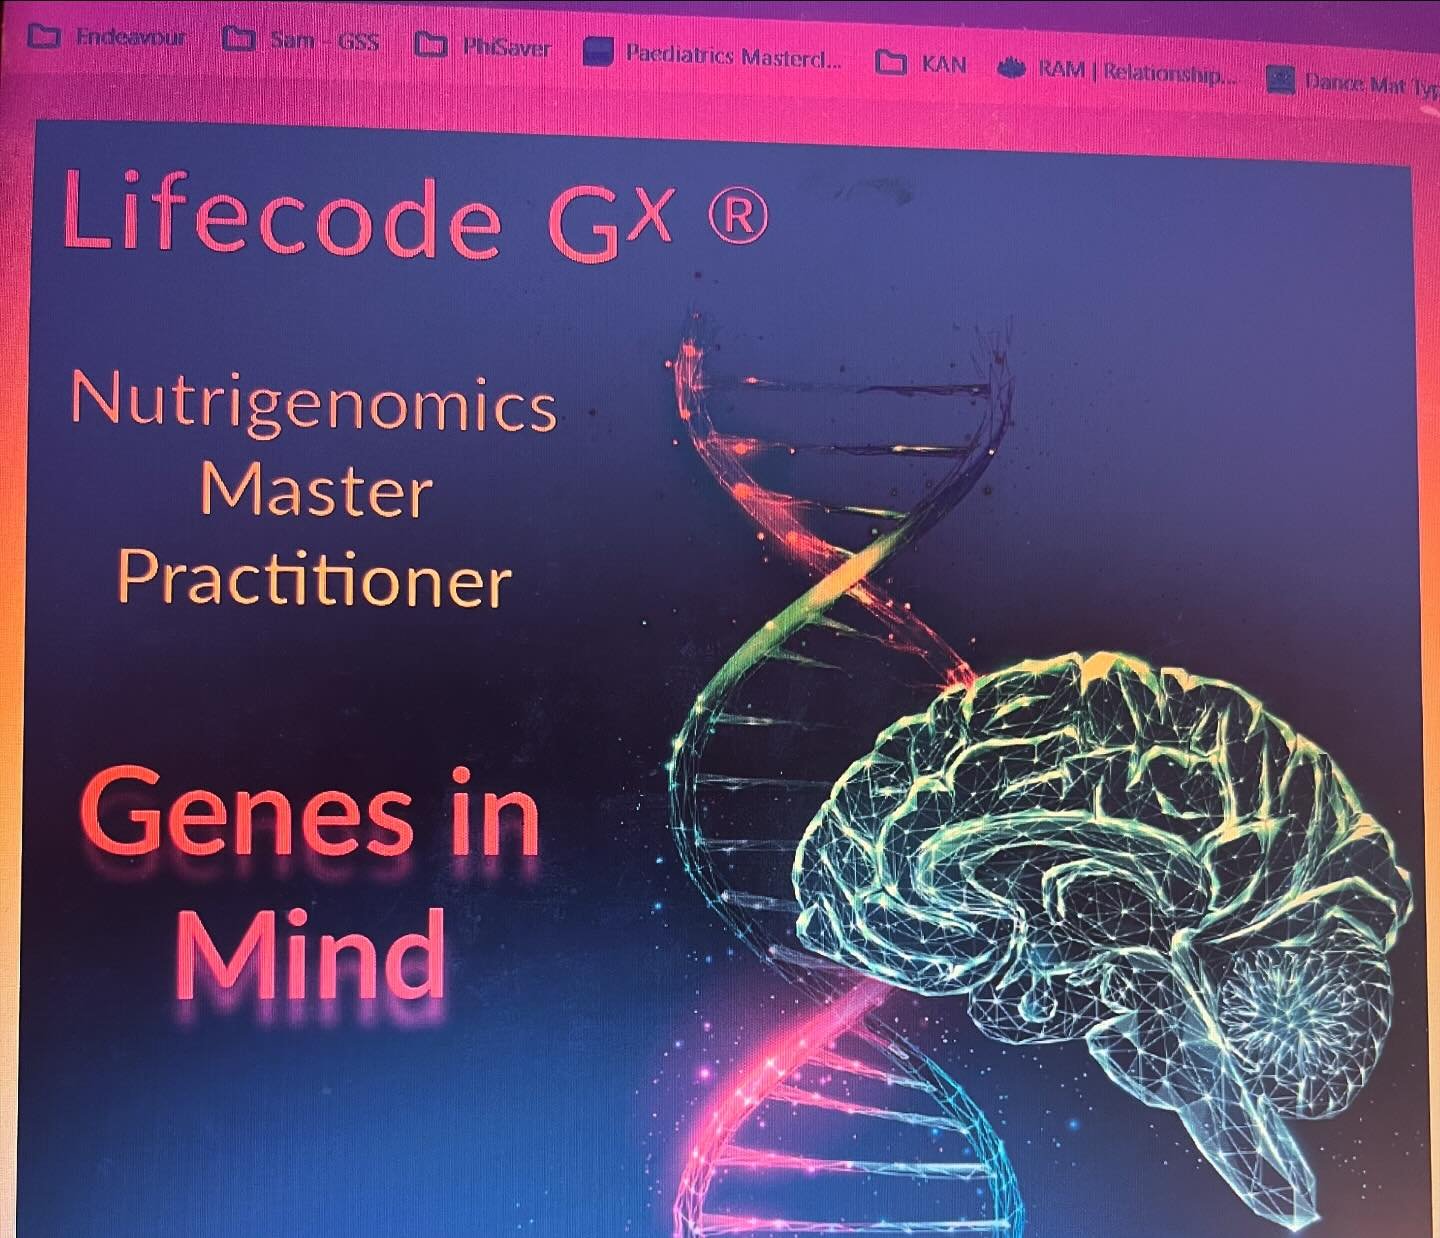 We use genetic testing and nutrigenomics quite extensively in our clinic, particularly in our PANS/PANDAs and neurodivergent patients but for many others too. Kelly is undertaking some Nutrigenomics Master Practitioner training at the moment to upski